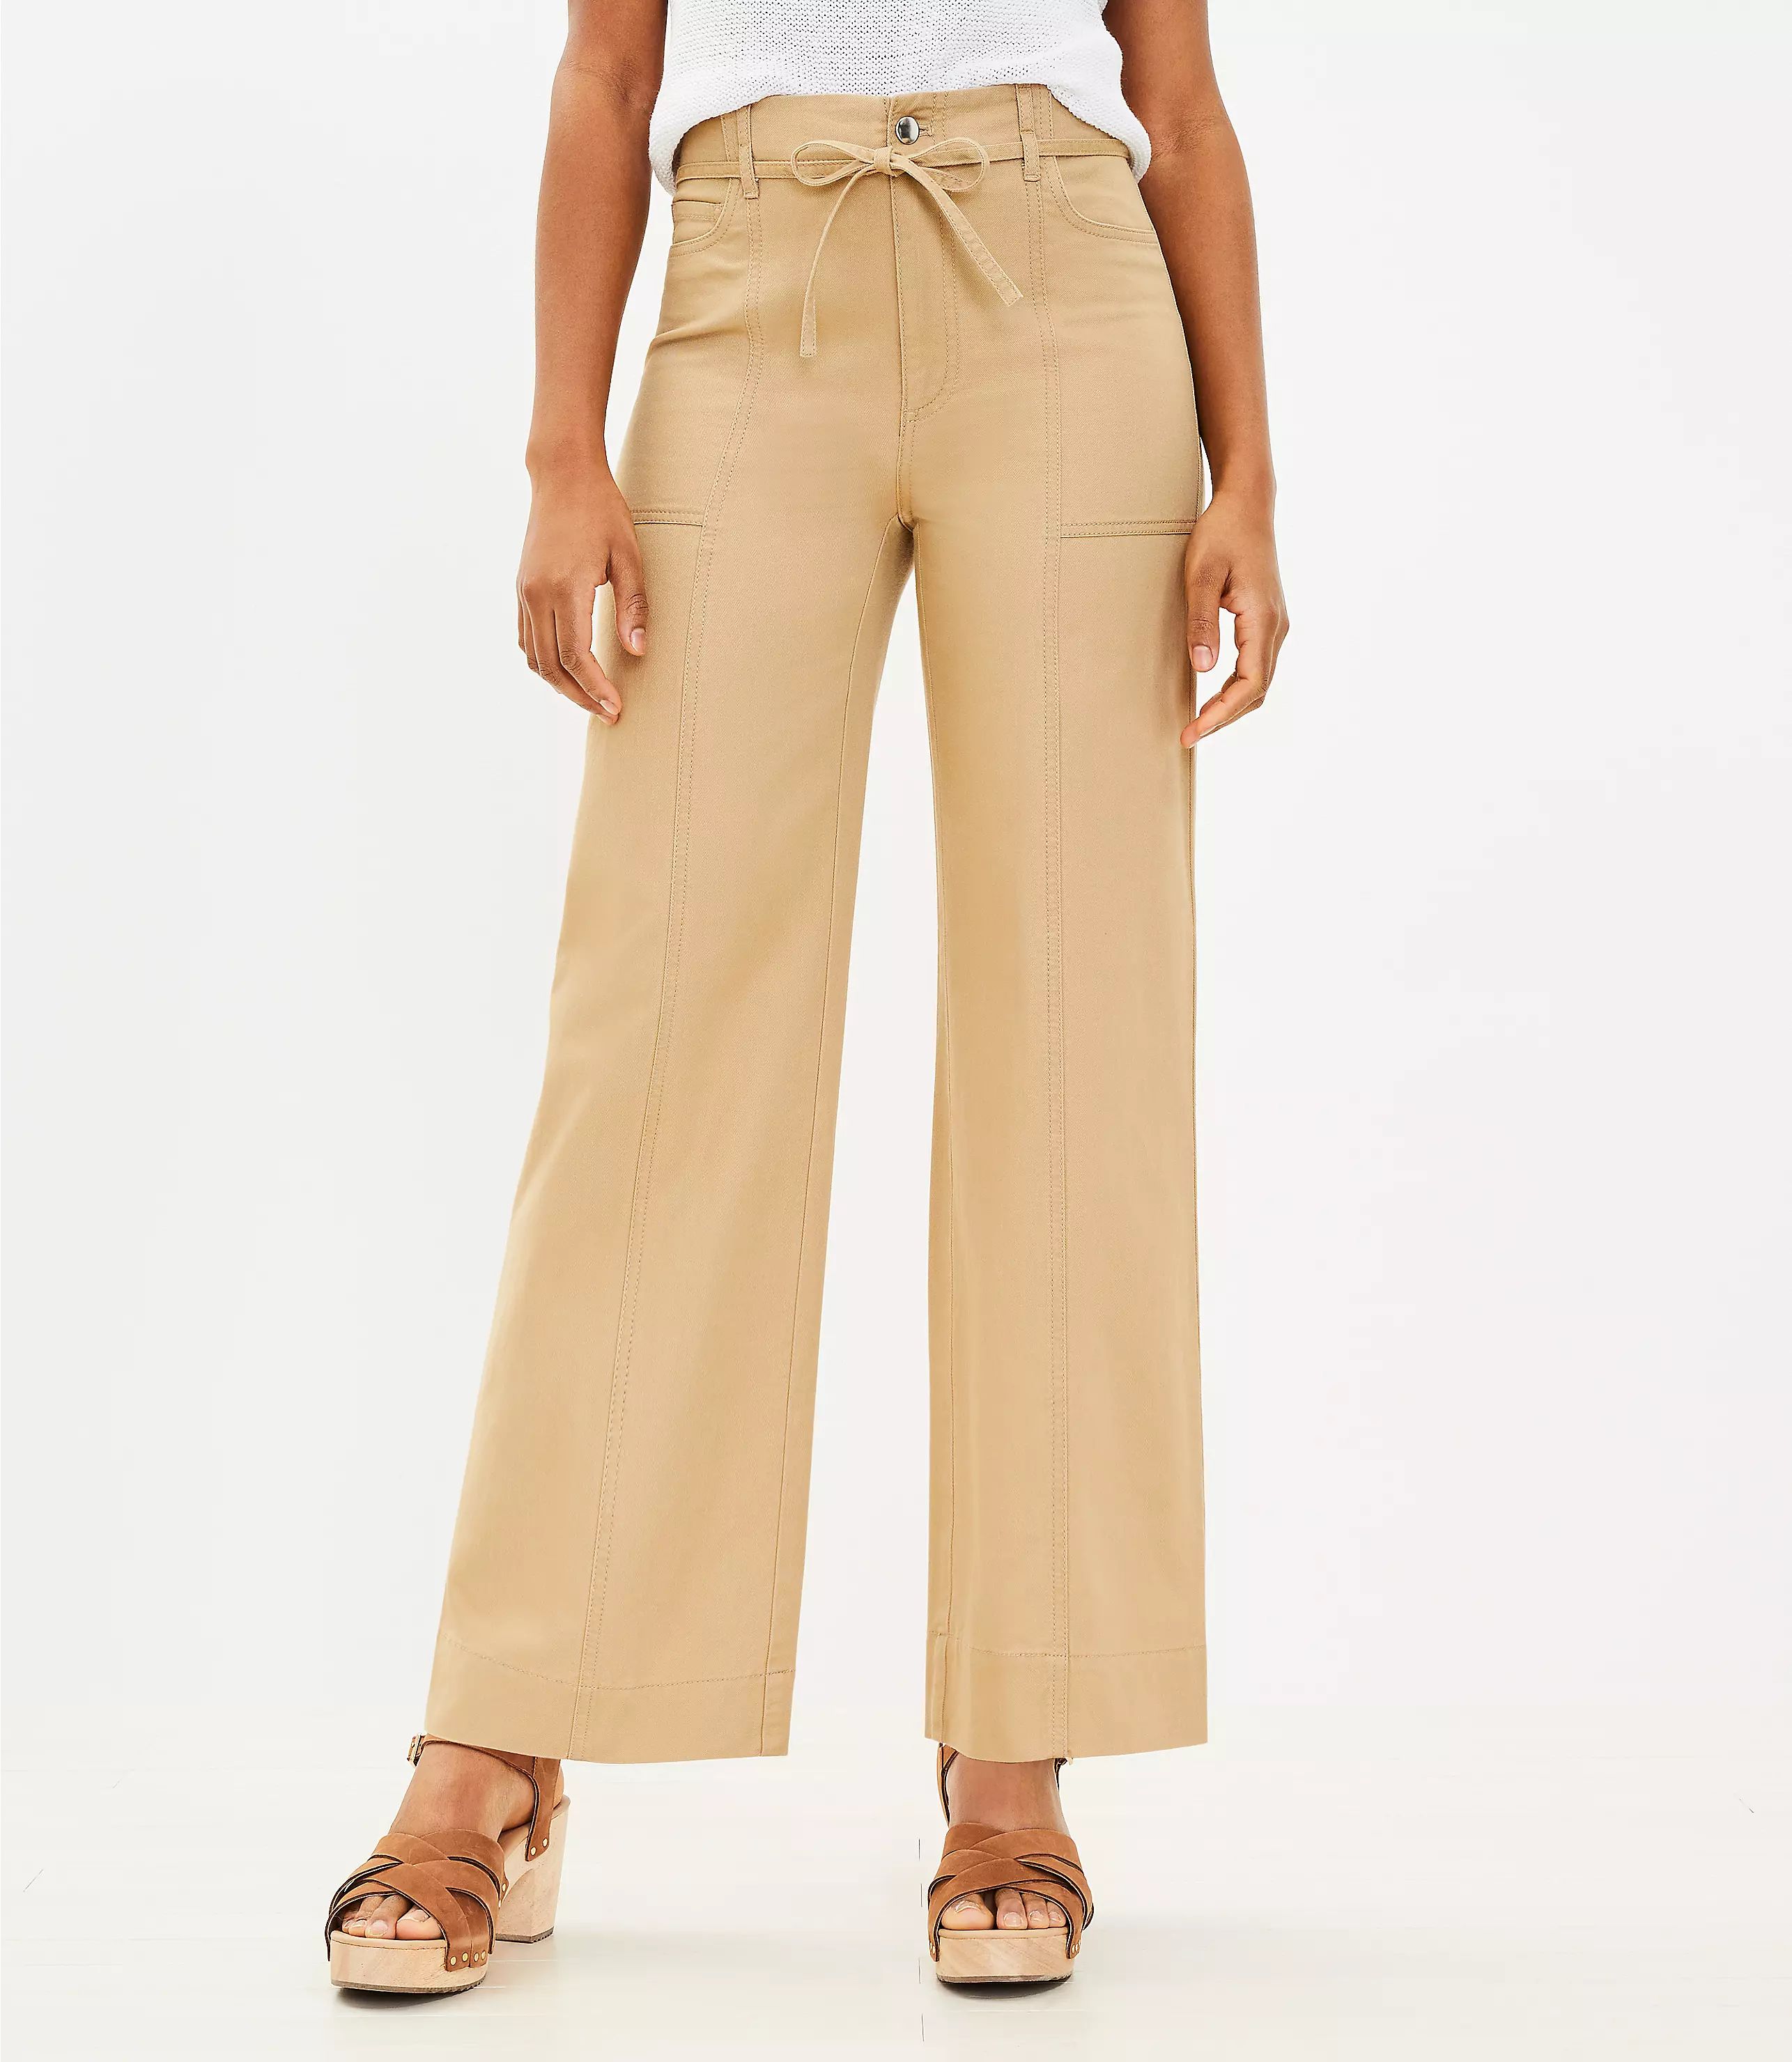 Stovepipe Pants in Twill | LOFT